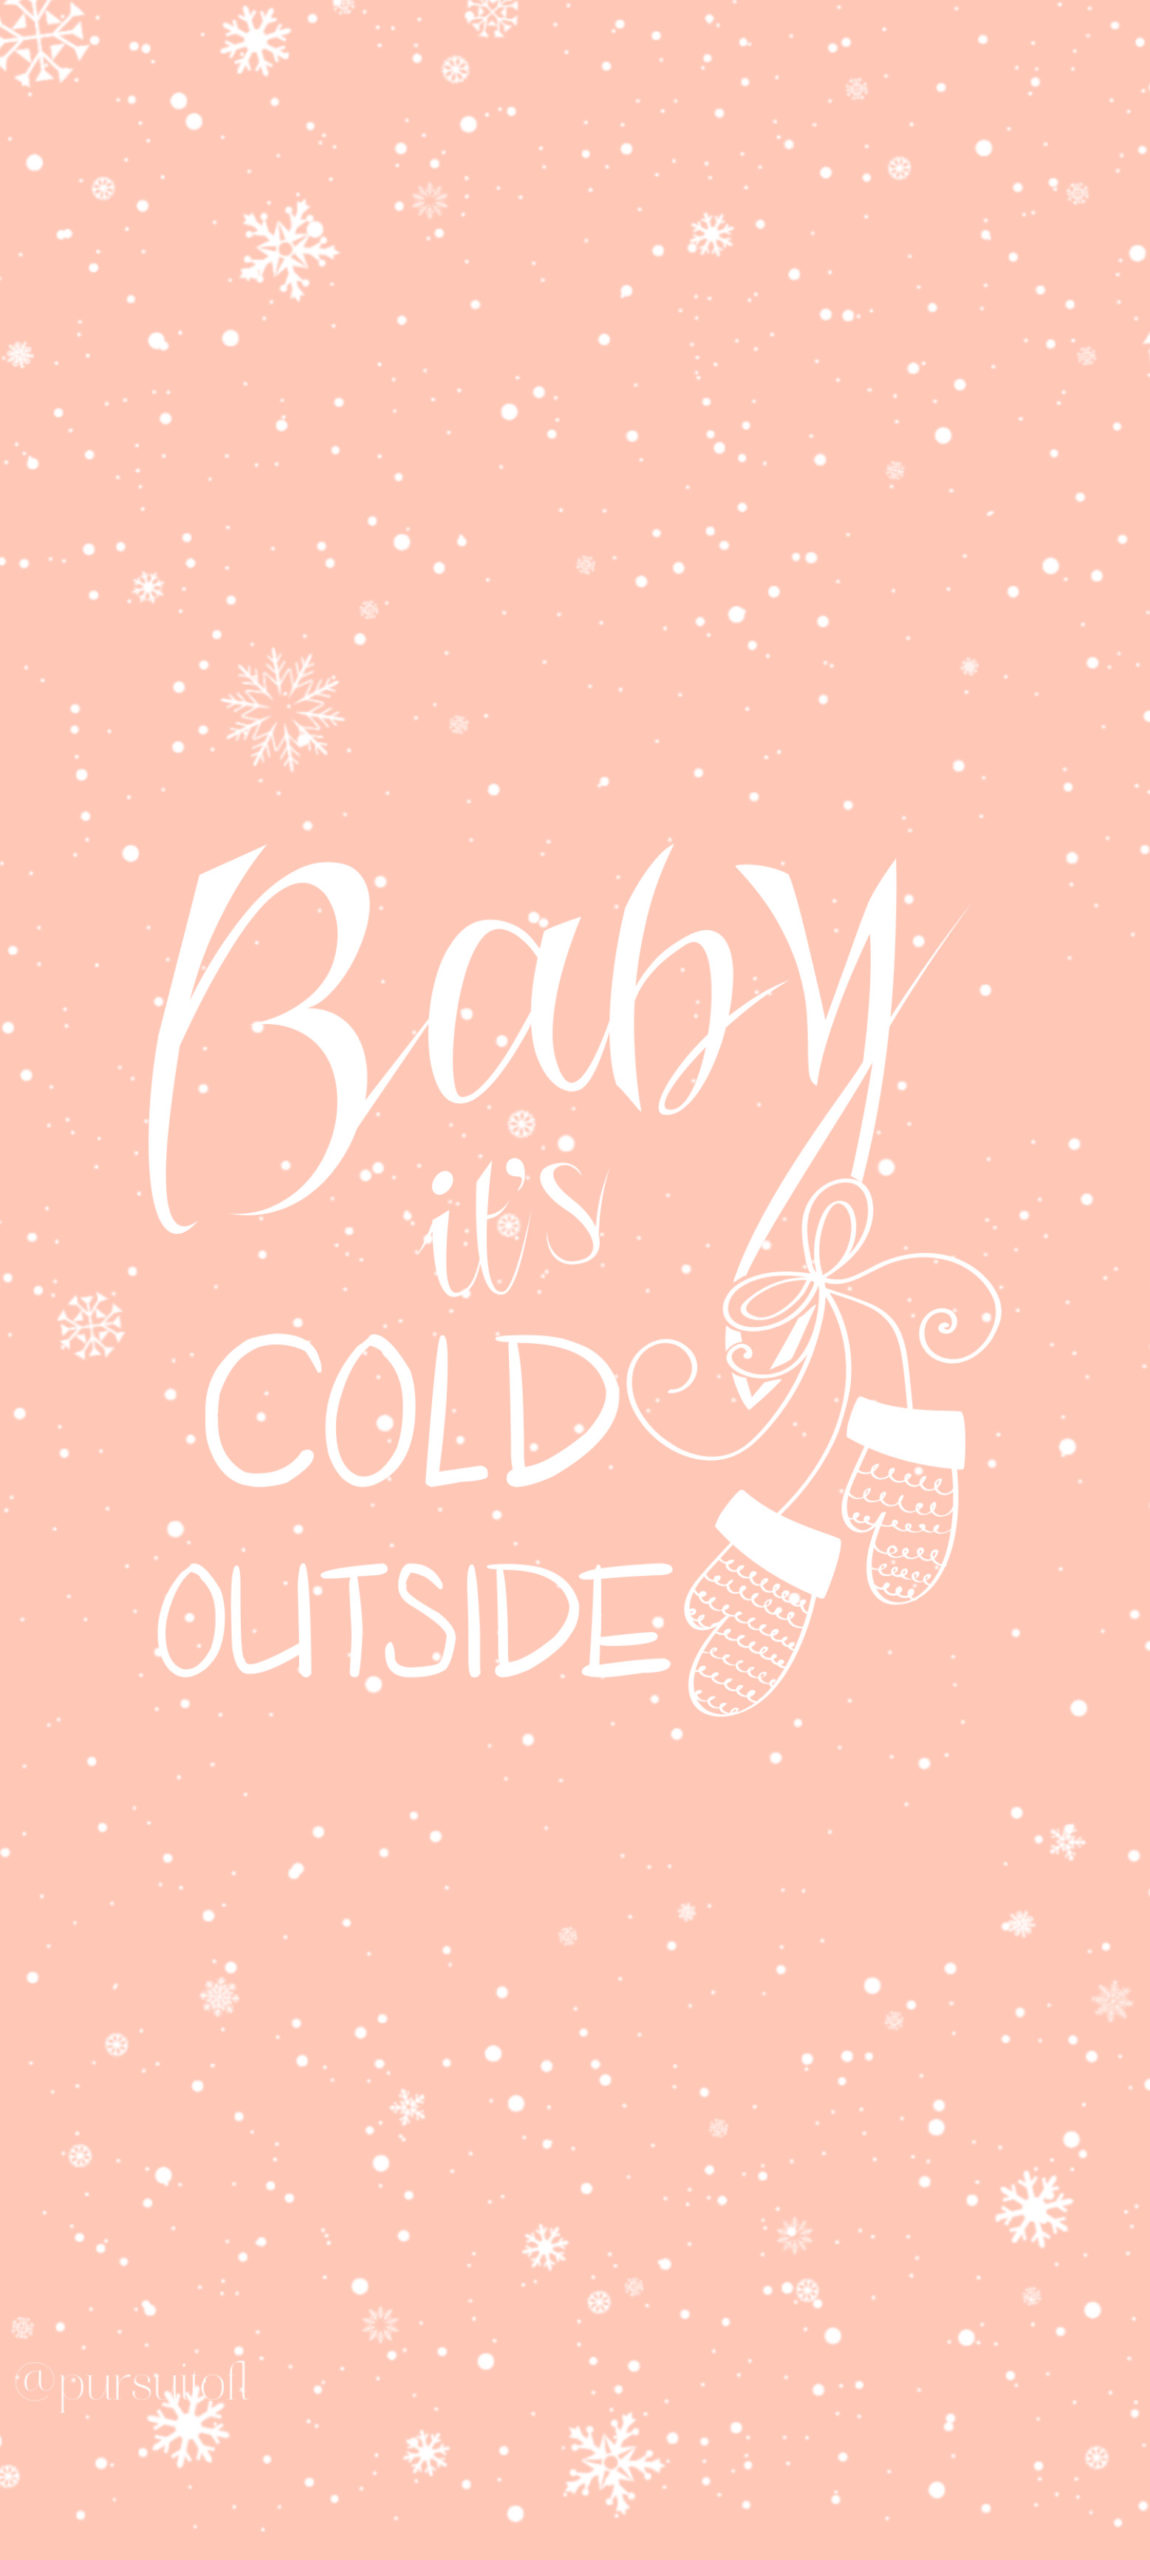 Peach Winter Phone Wallpaper with Baby it's Cold Outside text, mittens, and snow